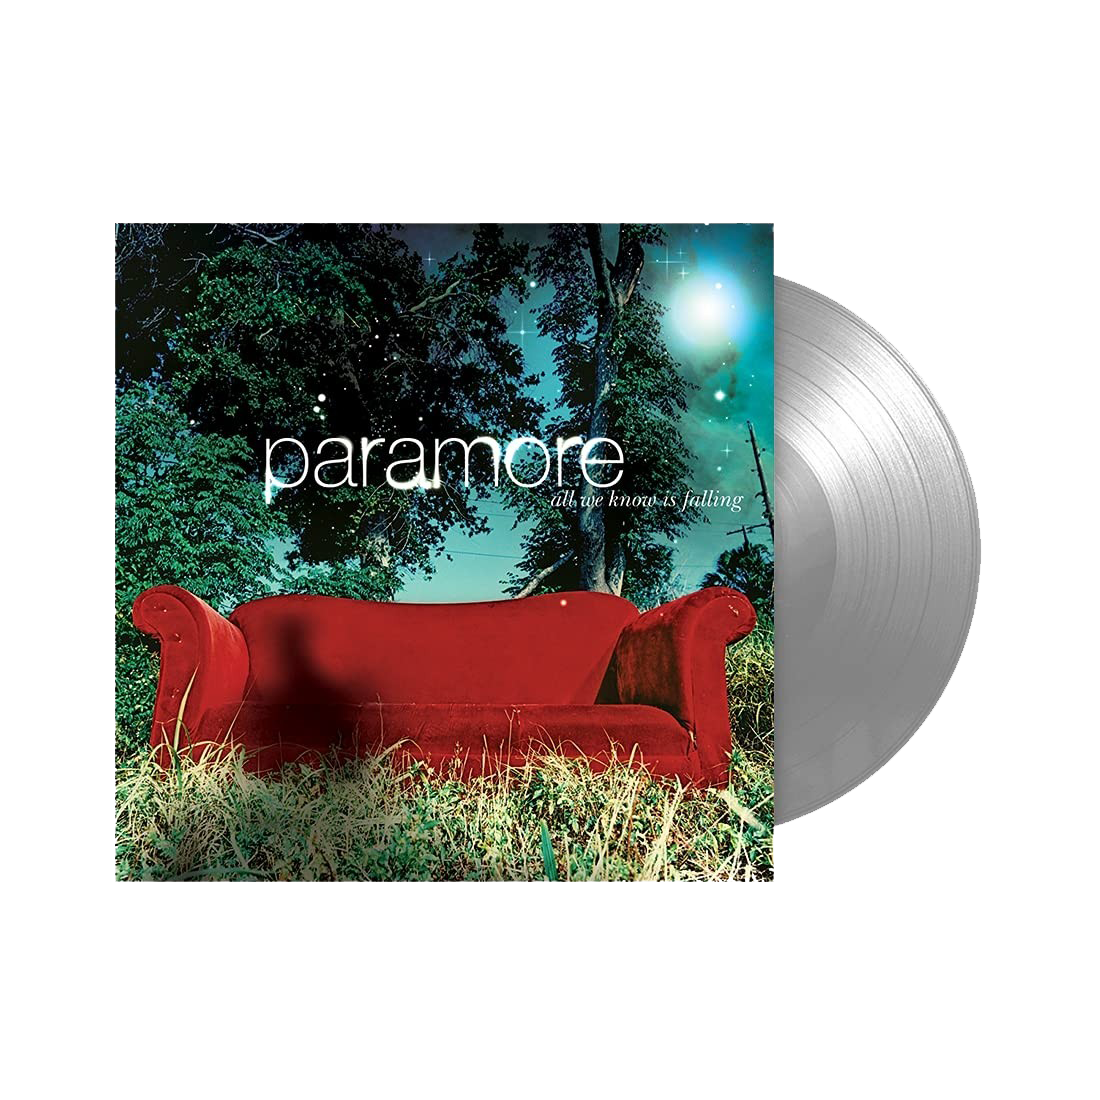 All We Know is Falling (Limited Edition FBR 25th Anniversary Grey Vinyl)